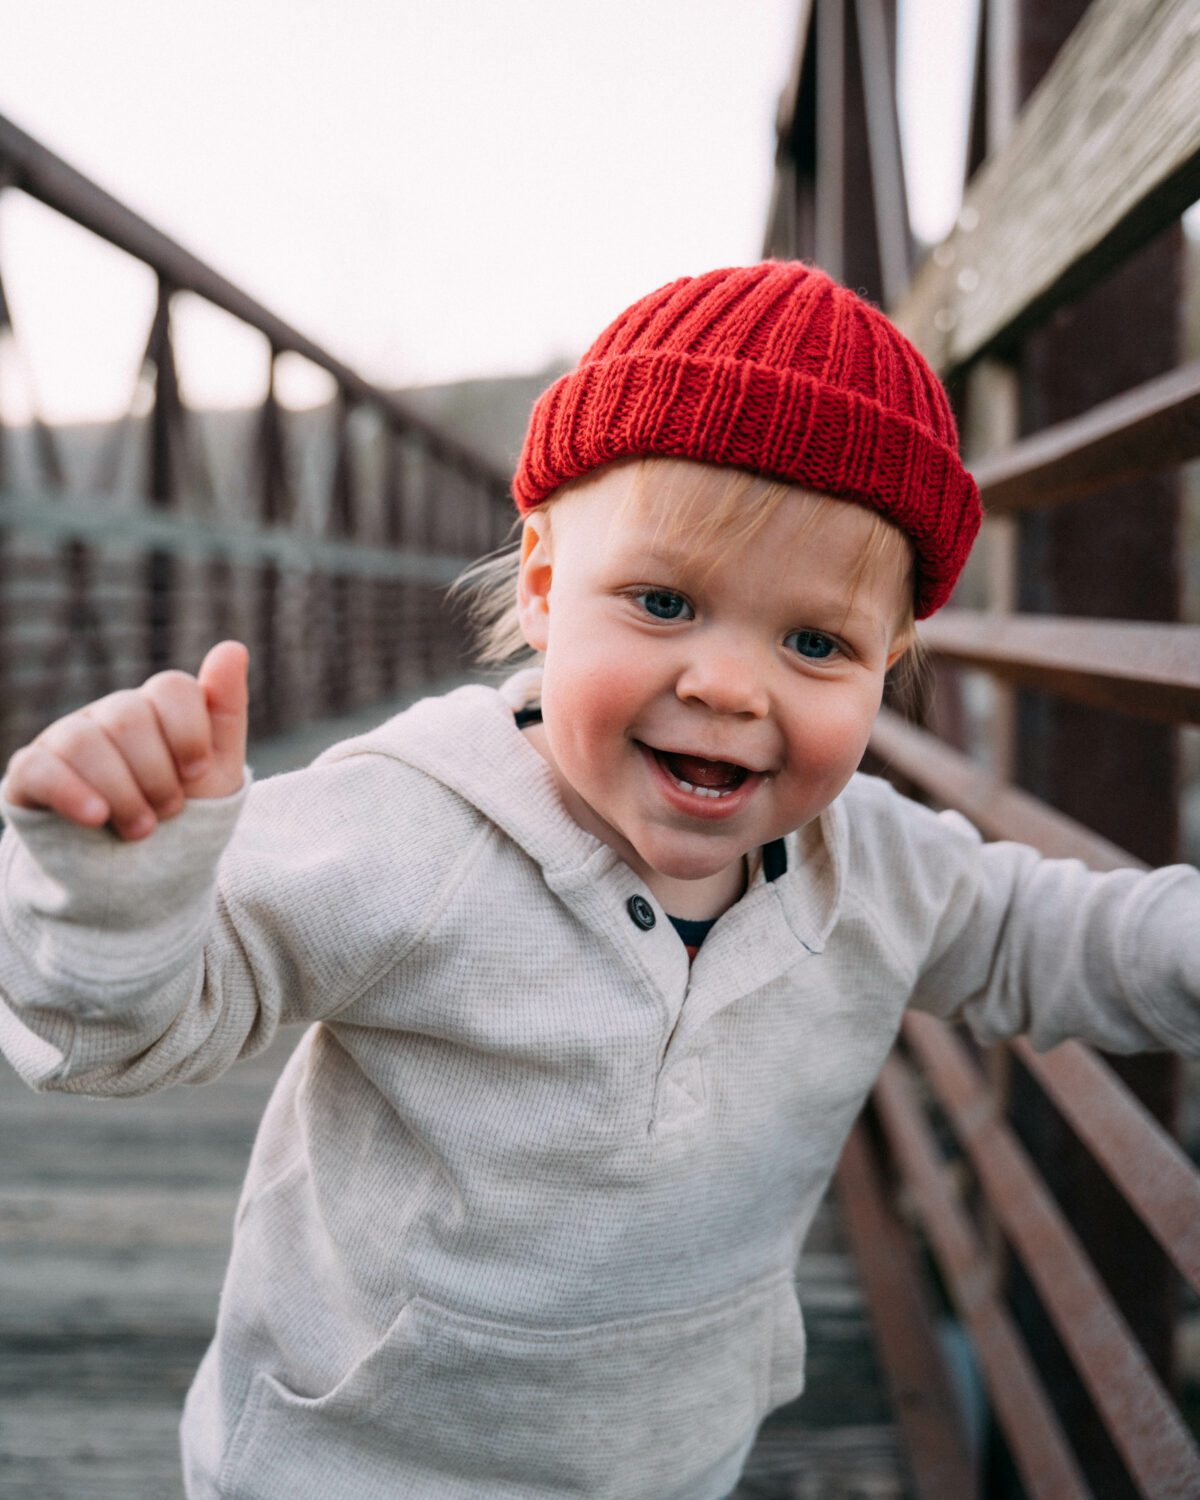 Kid with a red beanie